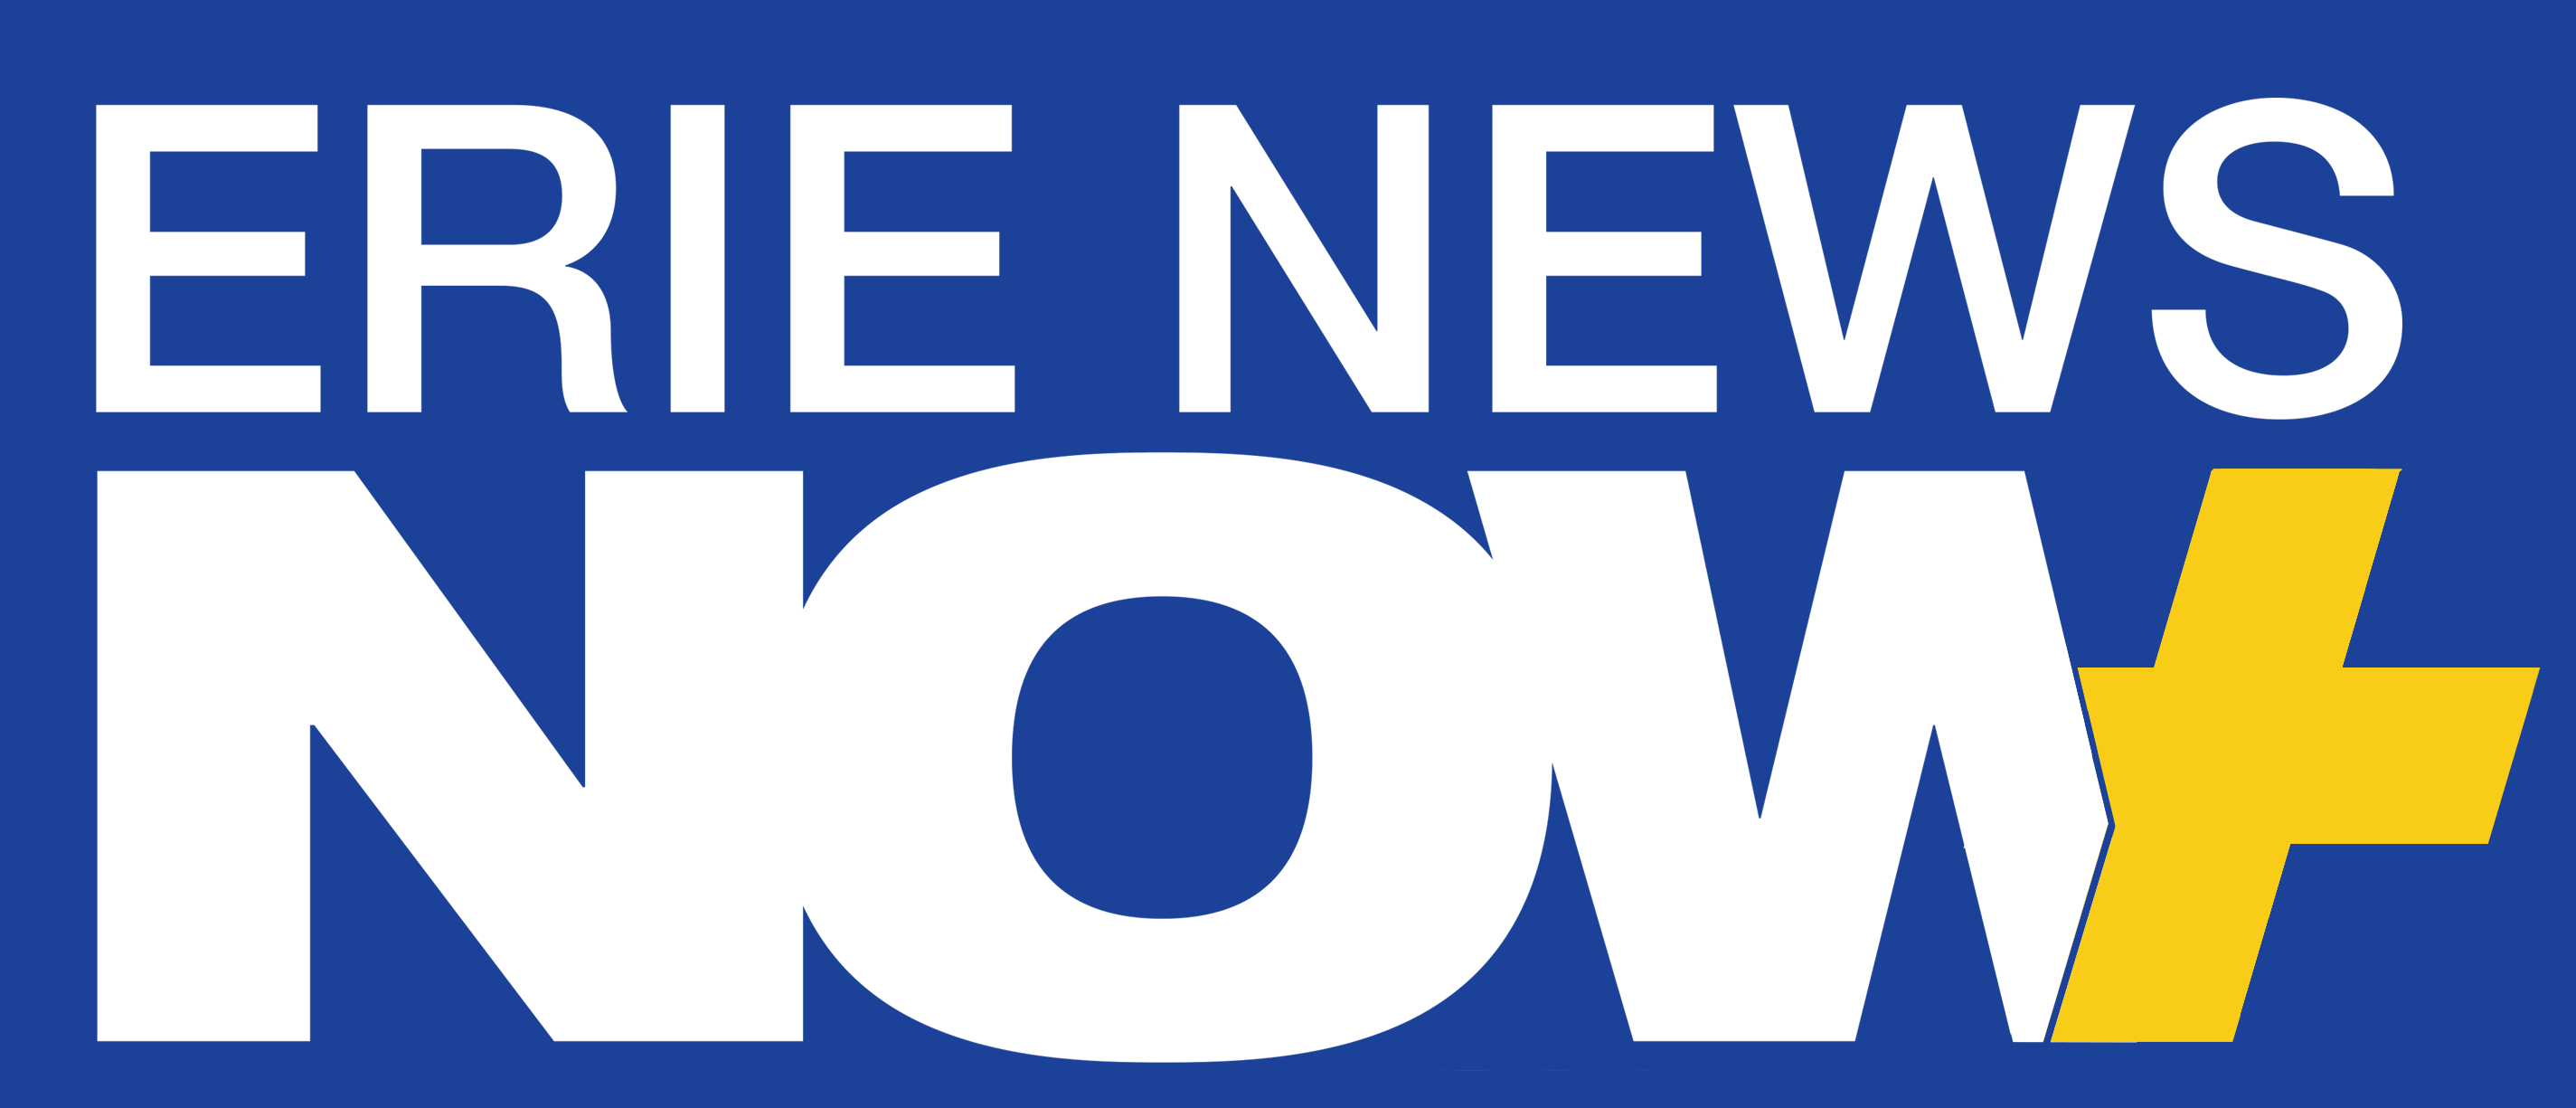 Erie News Now Plus Erie News Now WICU and WSEE in Erie, PA